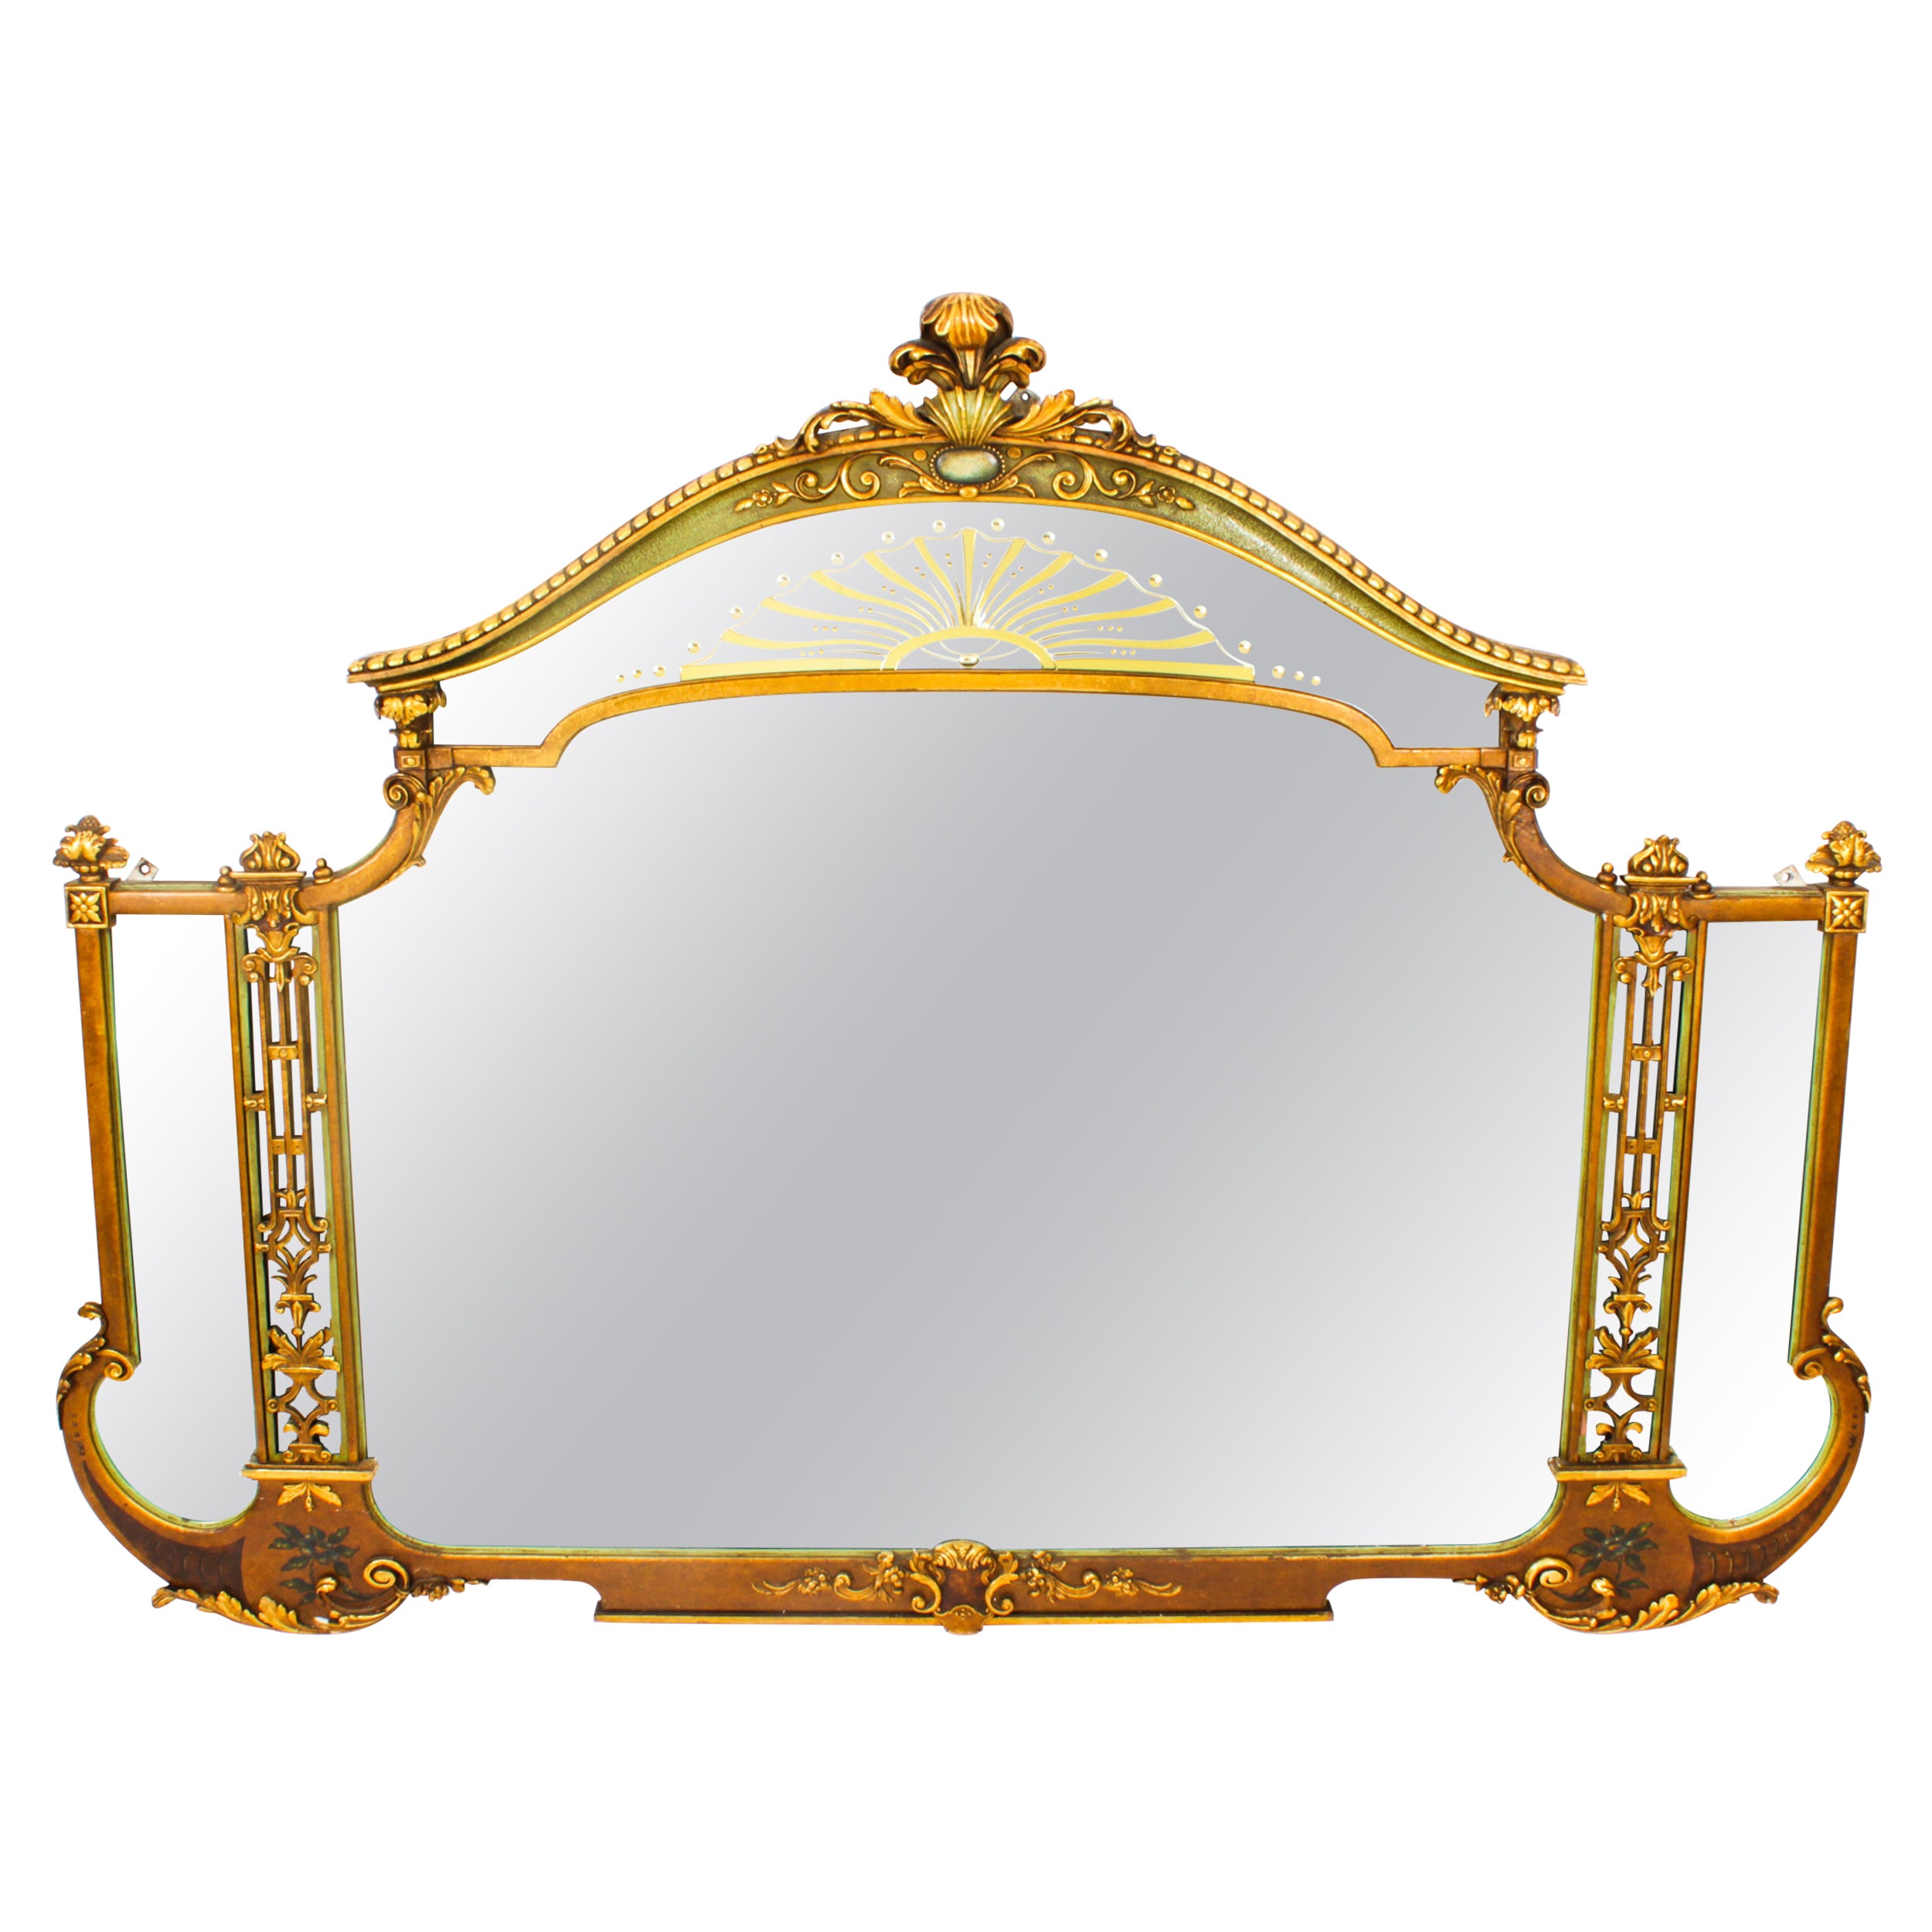 Gilt Mantel Mirrors and Fireplace Mirrors